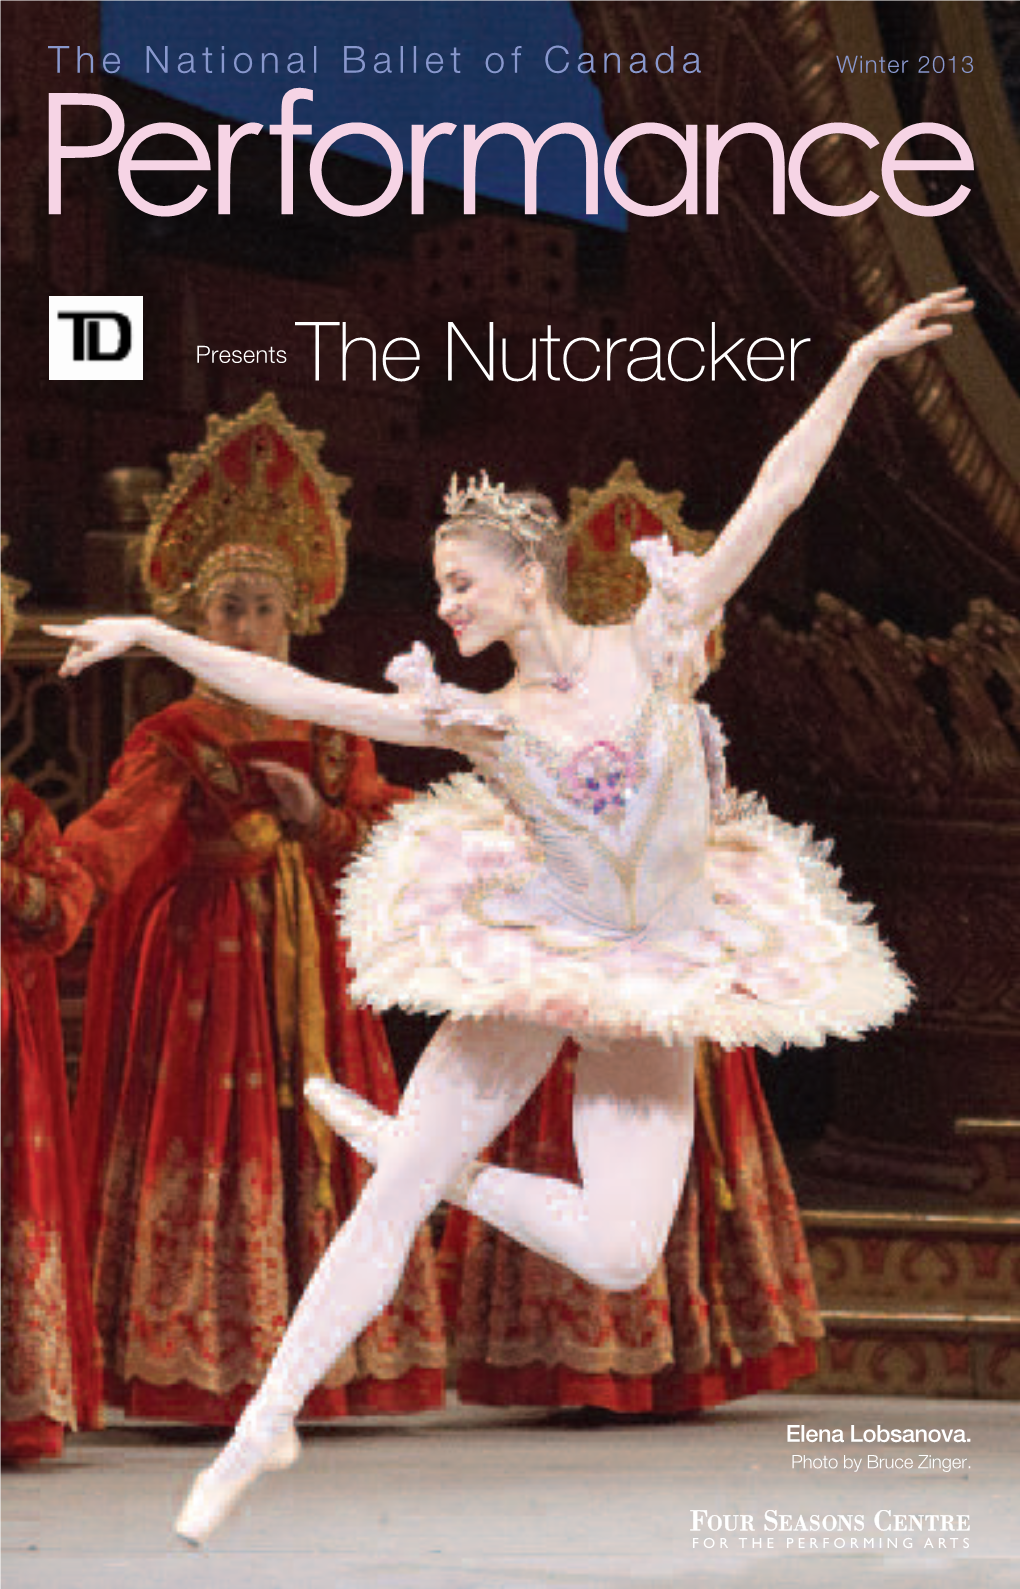 Read the 2013 Ballet Notes